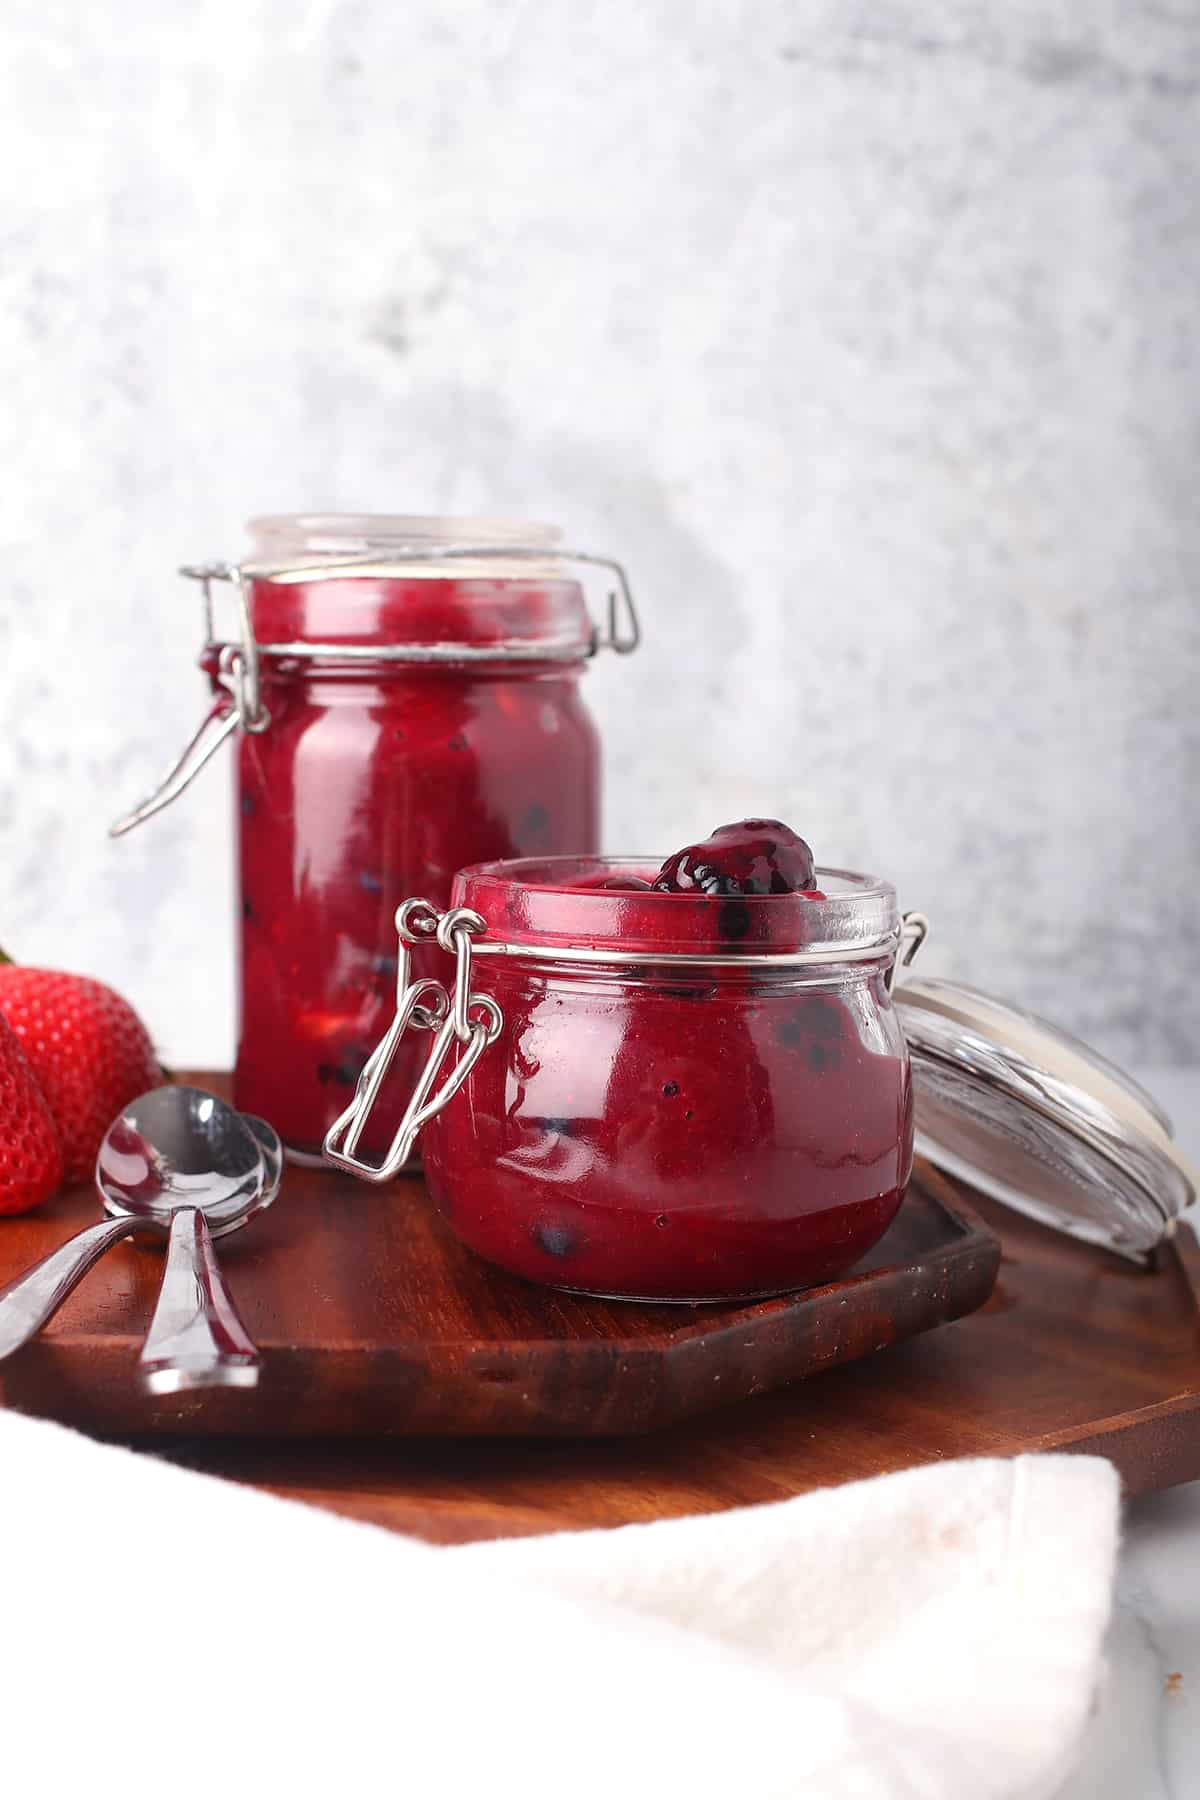 Easy Mixed Berry Compote Recipe - My Darling Vegan